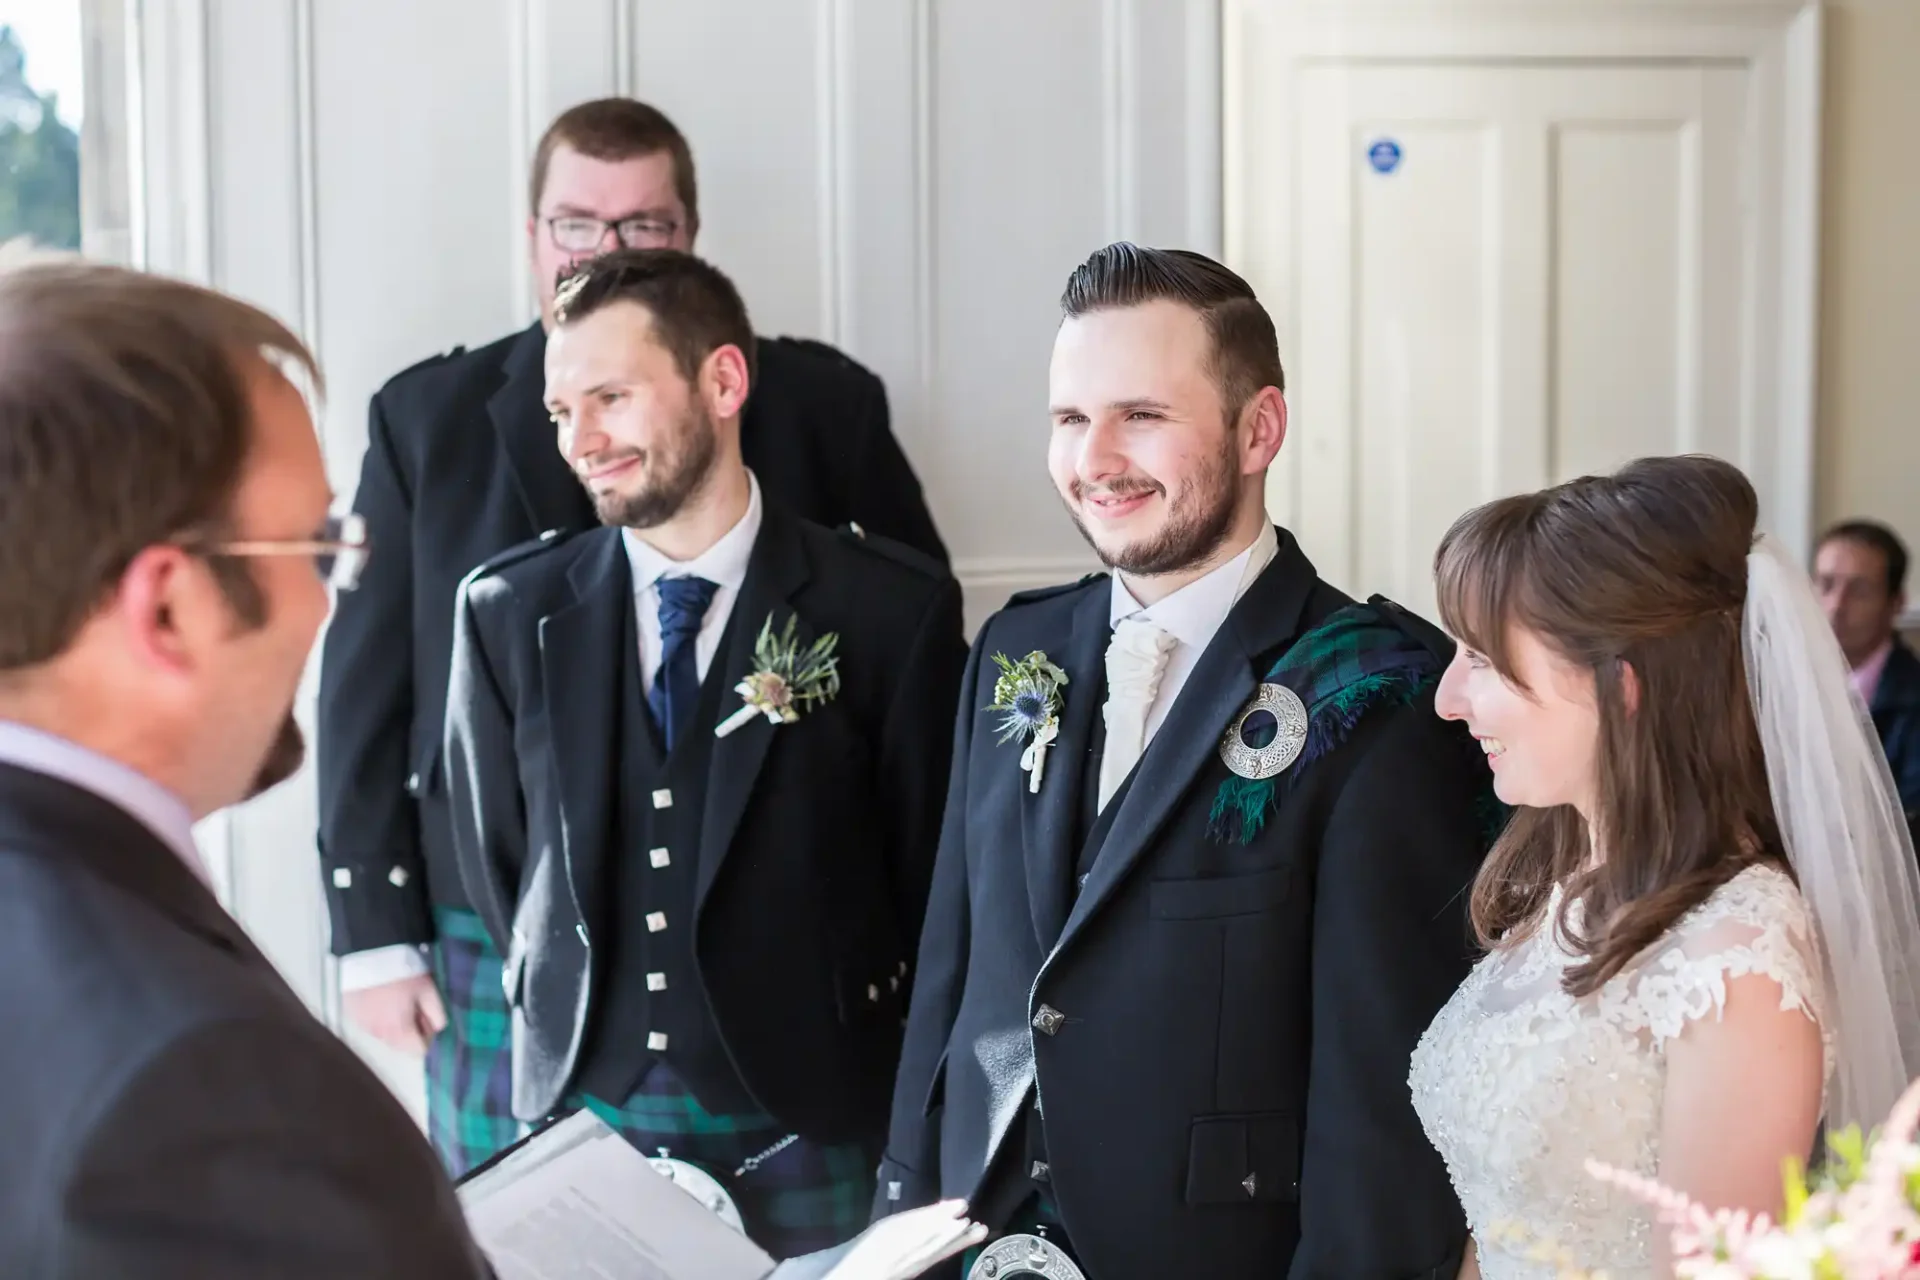 A wedding ceremony with a smiling groom in a kilt and bride in a white dress, standing with guests in a well-lit room.